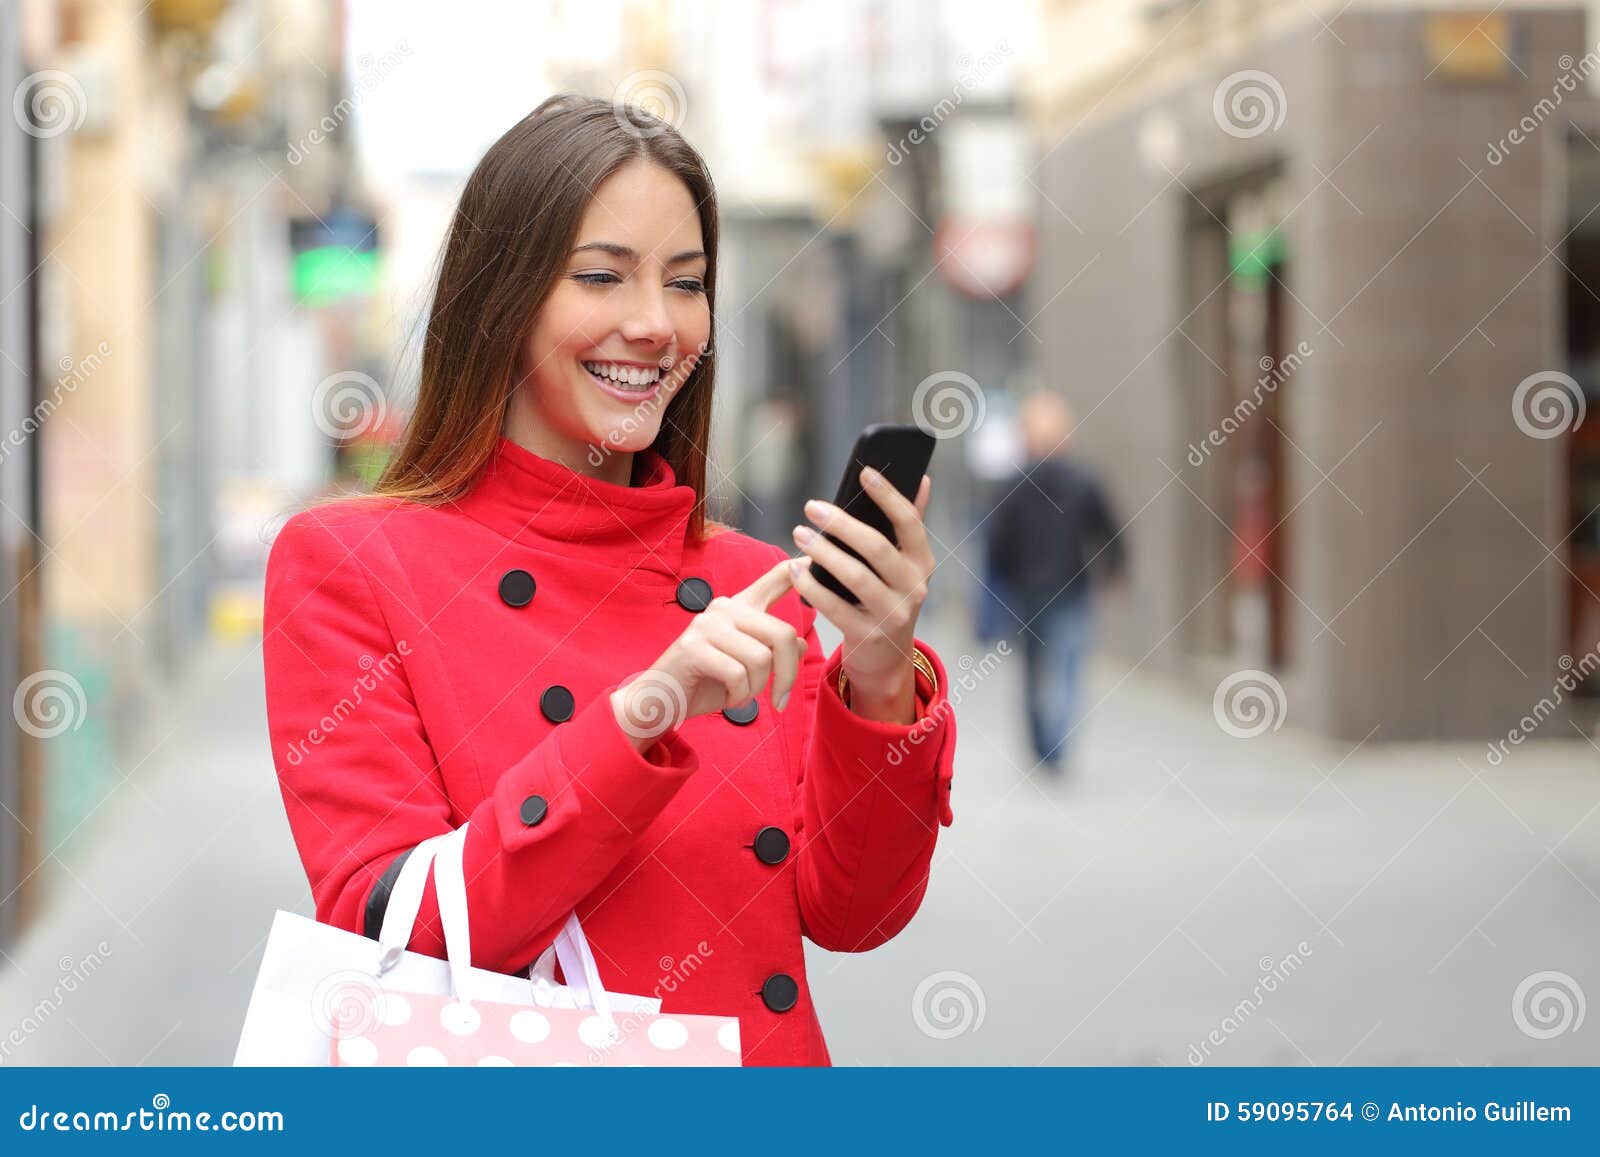 shopper buying online on the smart phone